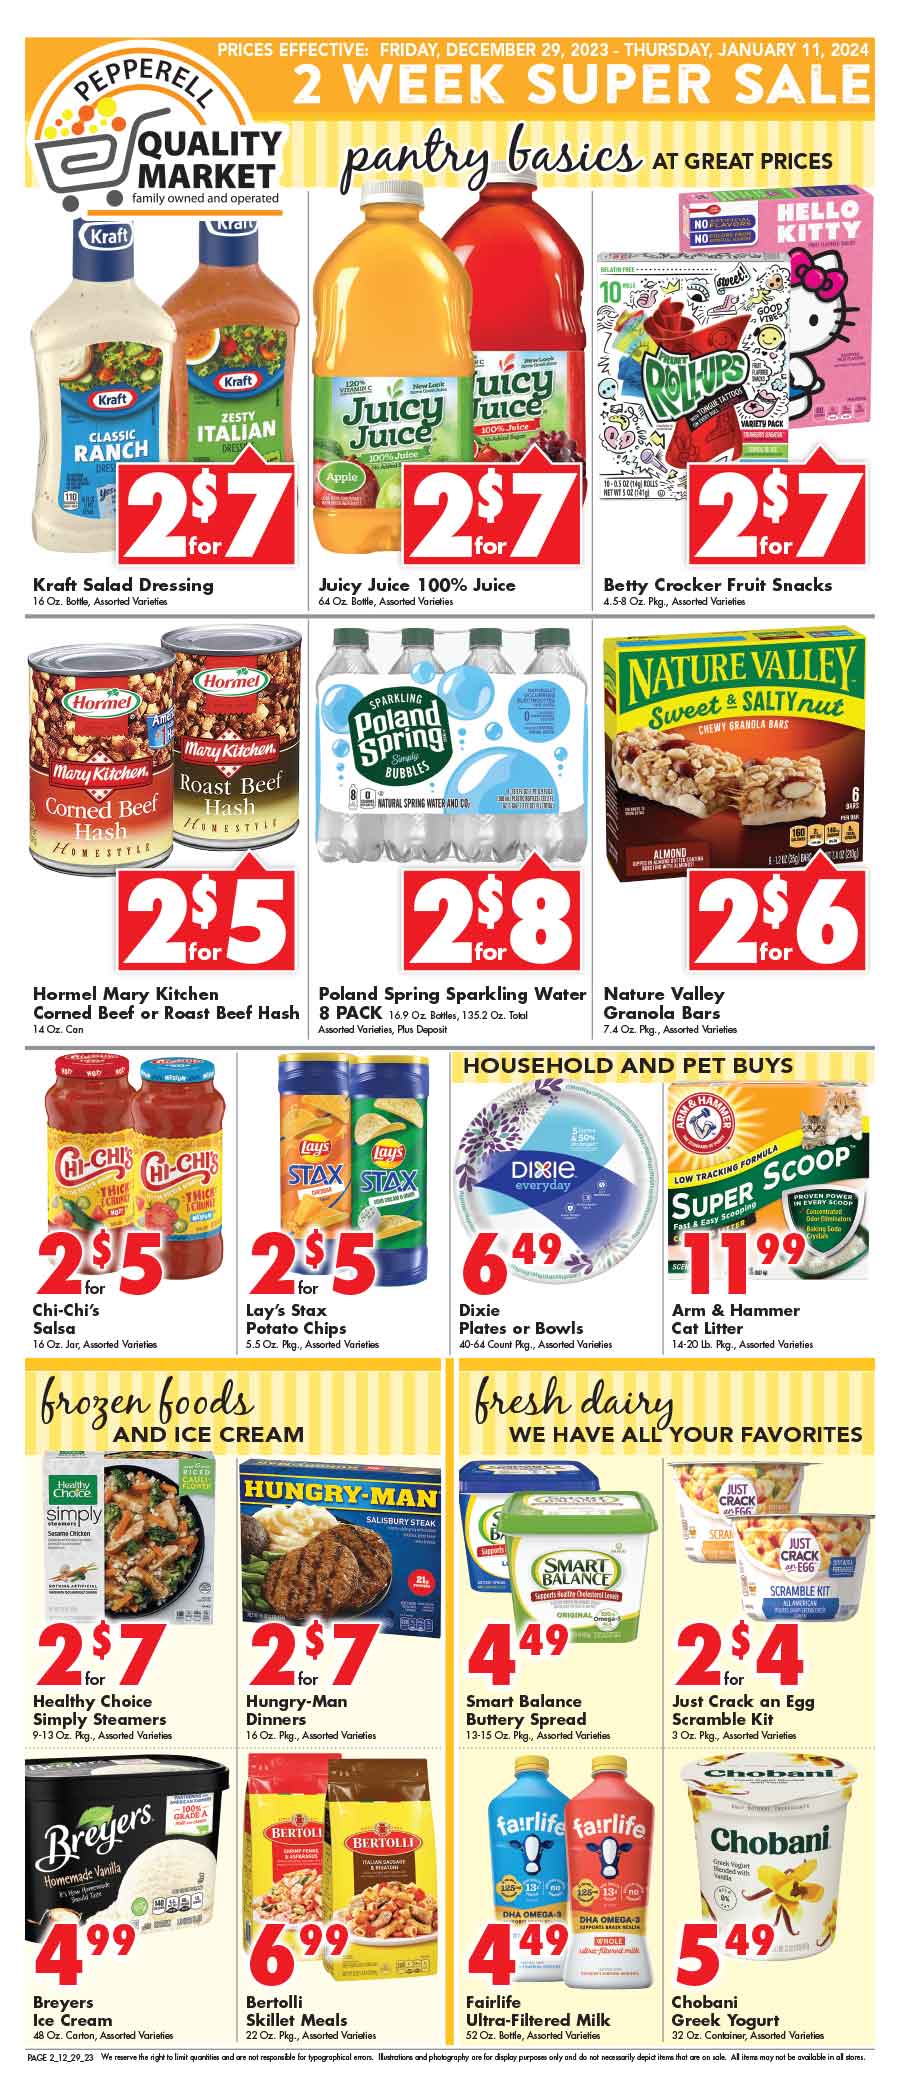 WEEKLY SPECIALS - Pepperell Quality Market